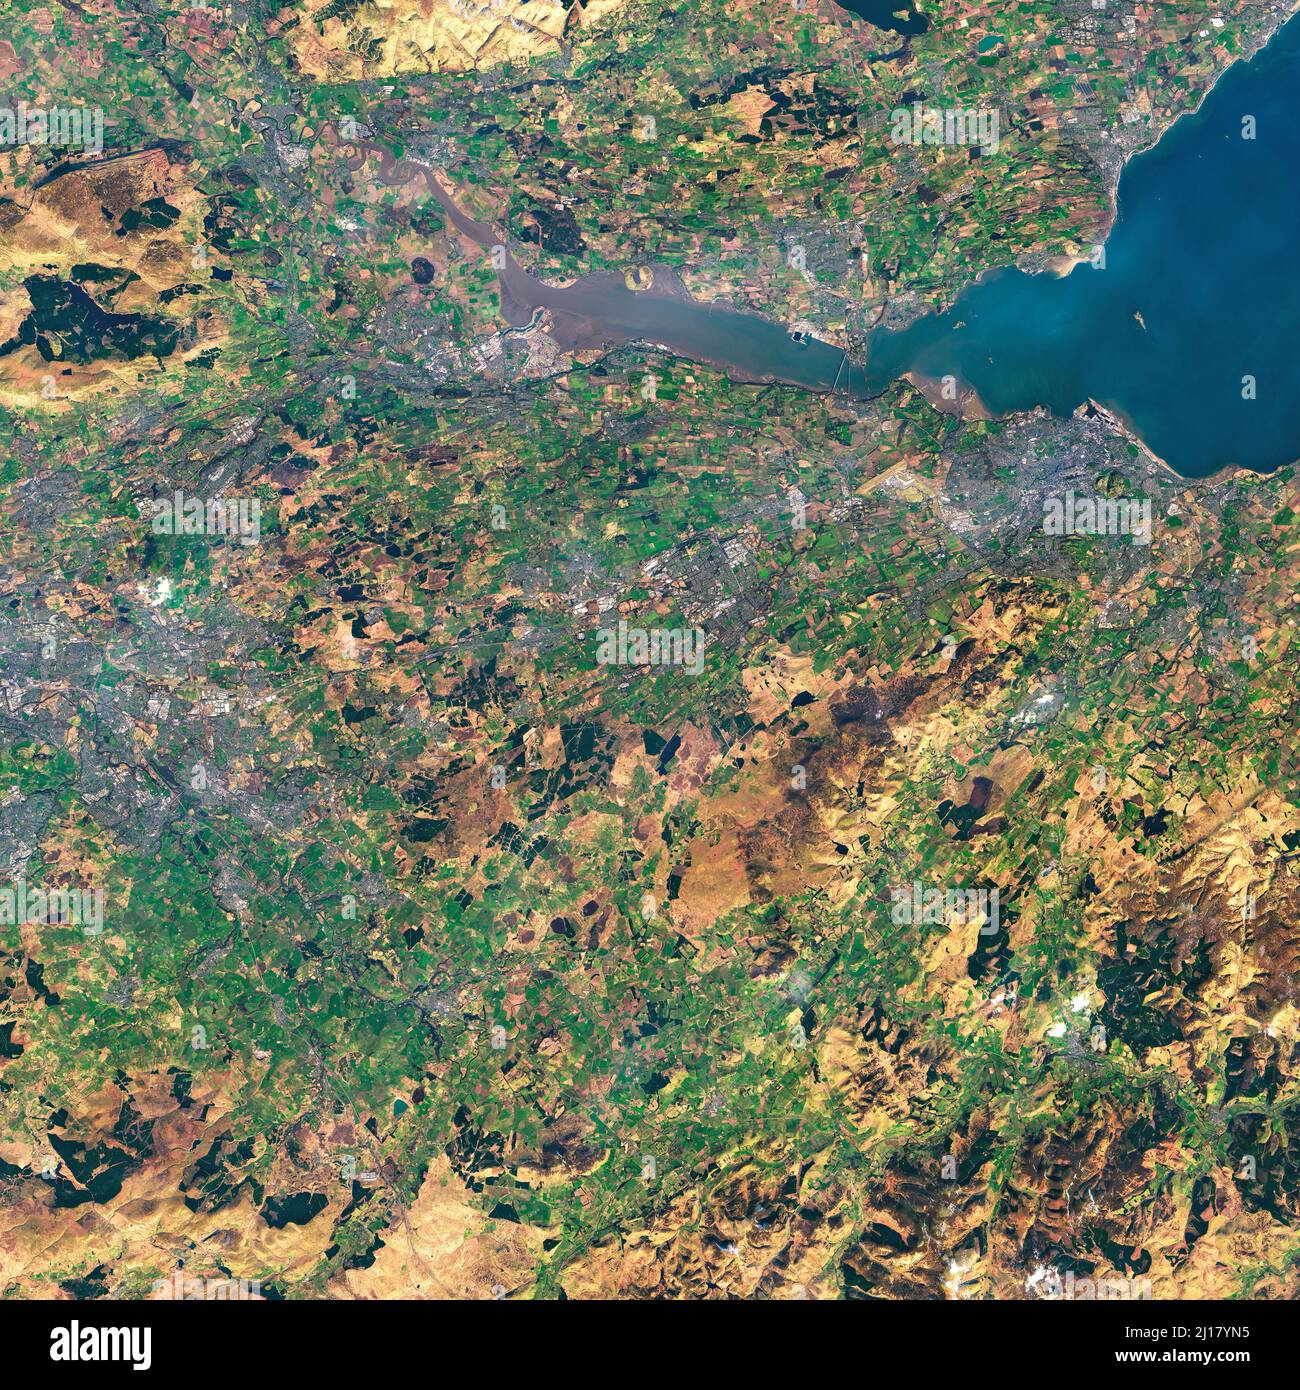 SCOTLAND, UK - 08 March 2022 - This amazing satellite image from Landsat 9 shows West Lothian, Midlothian, East Lothian, Fife, Edinburgh and much of t Stock Photo